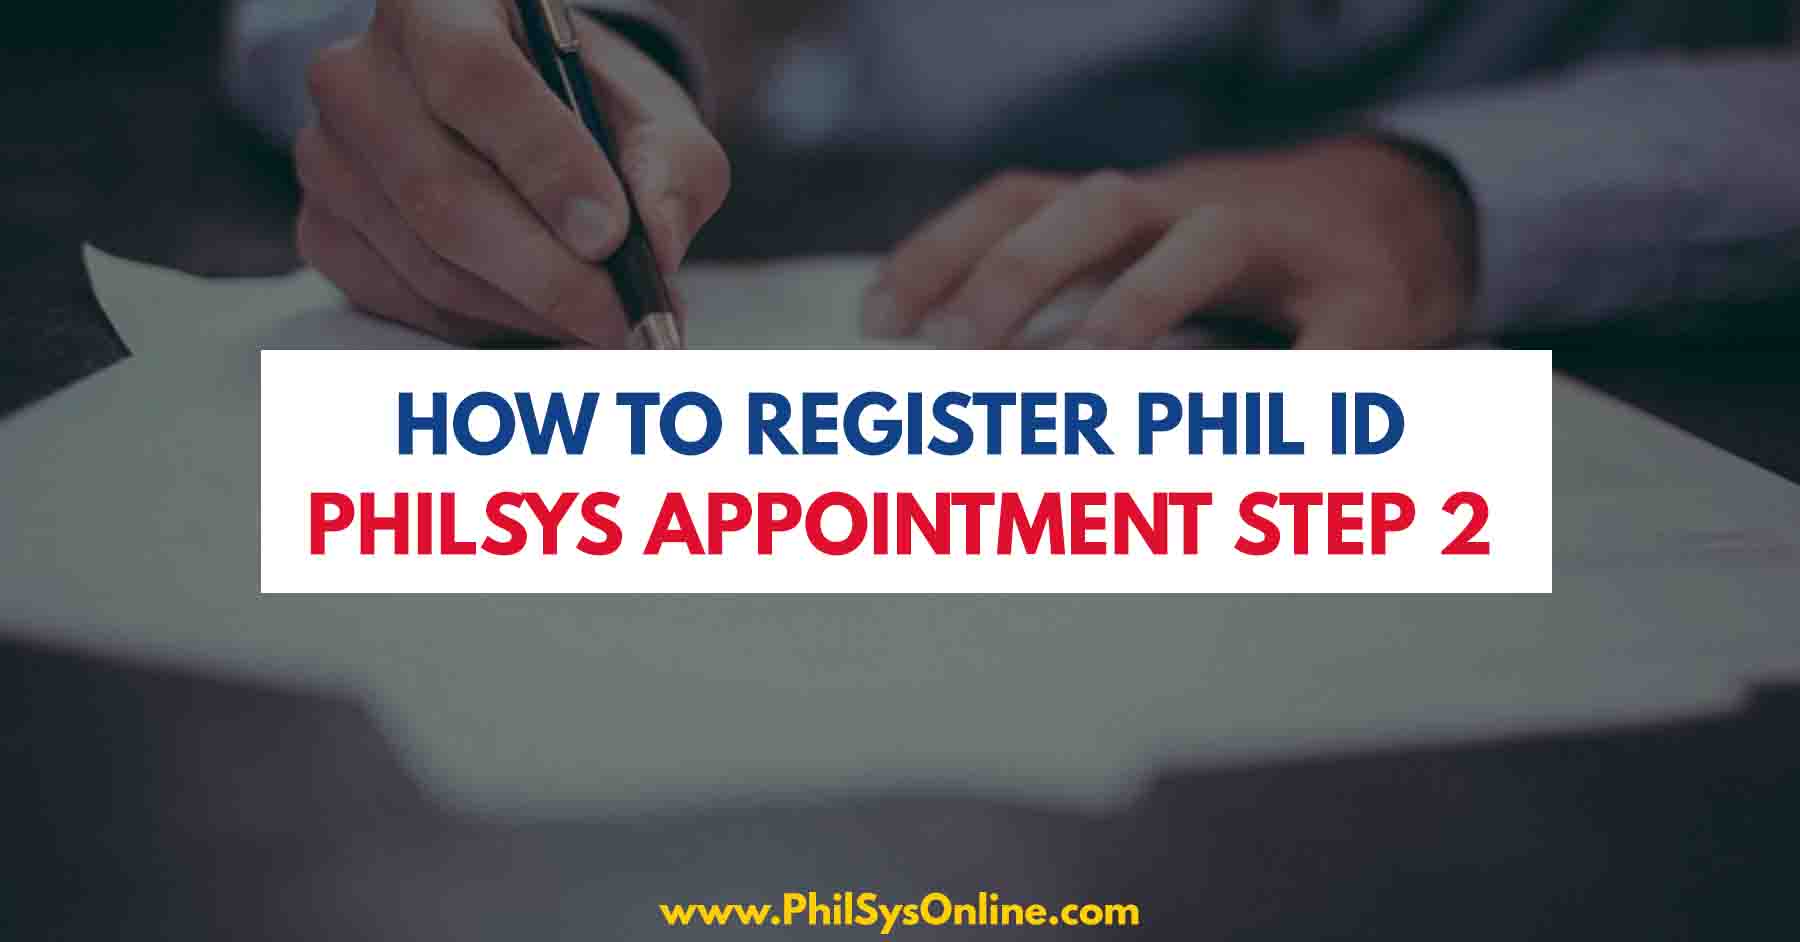 philsys registration step 2 appointment national id